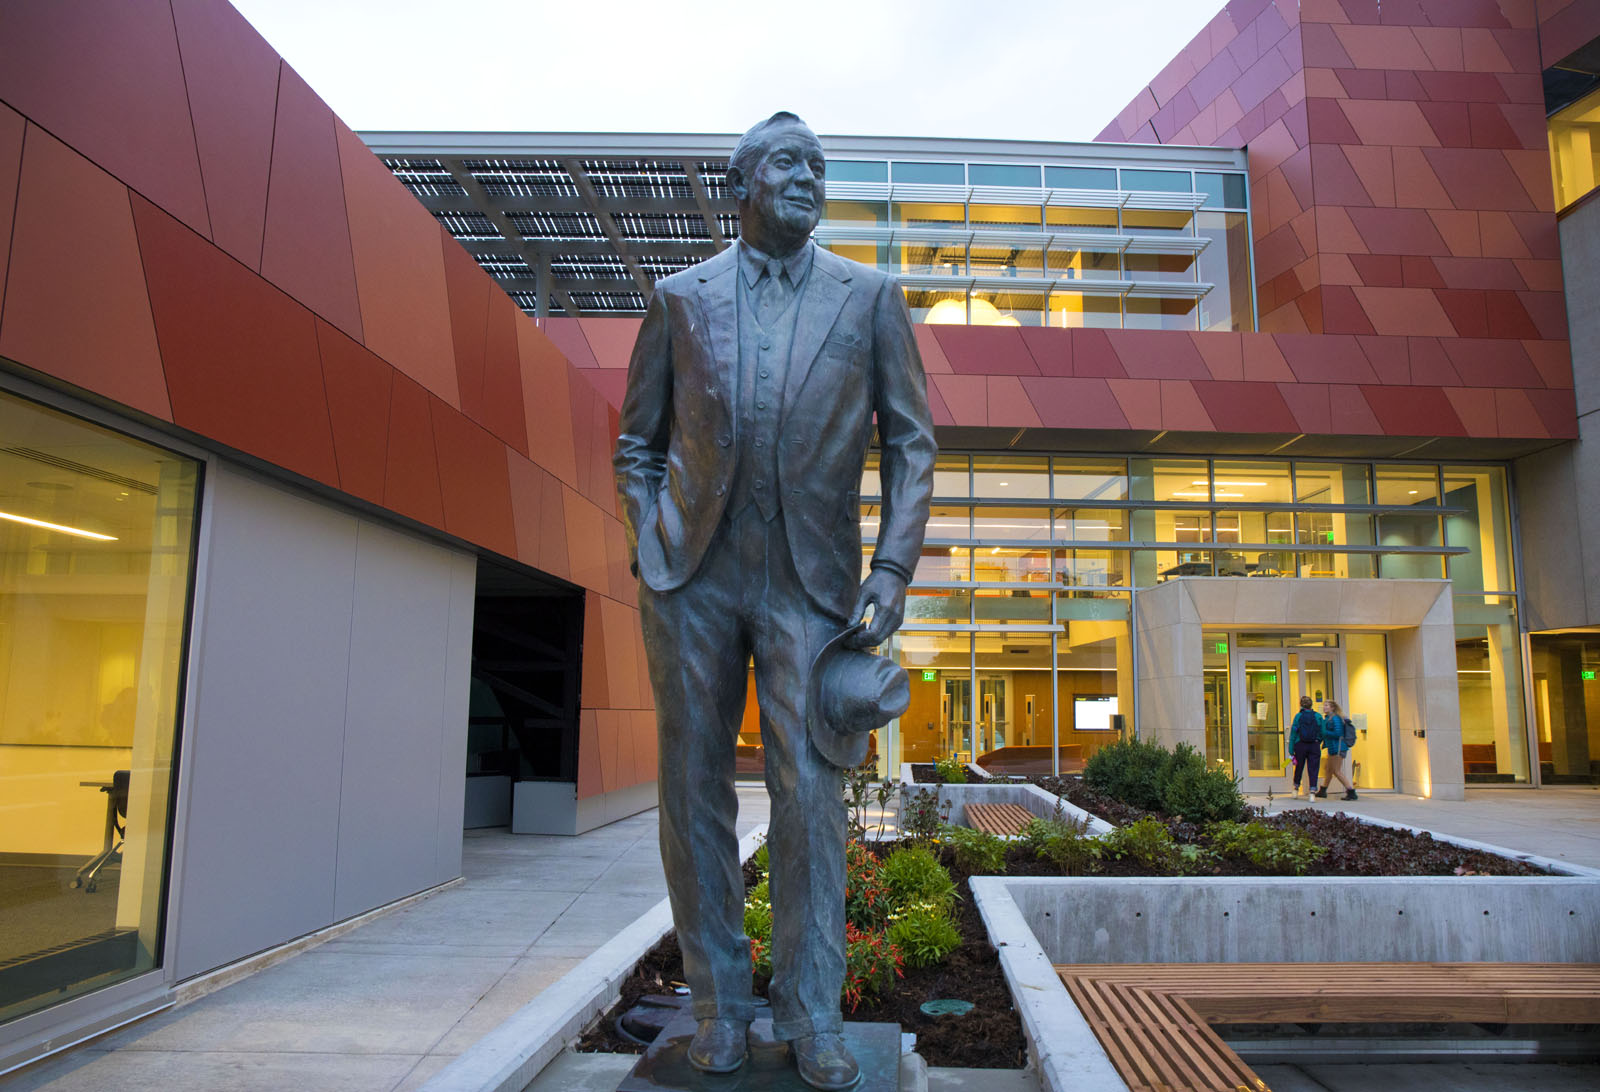 A statue of Charles Leaming Tutt Jr. greets visitors at the Tutt Library main entrance.